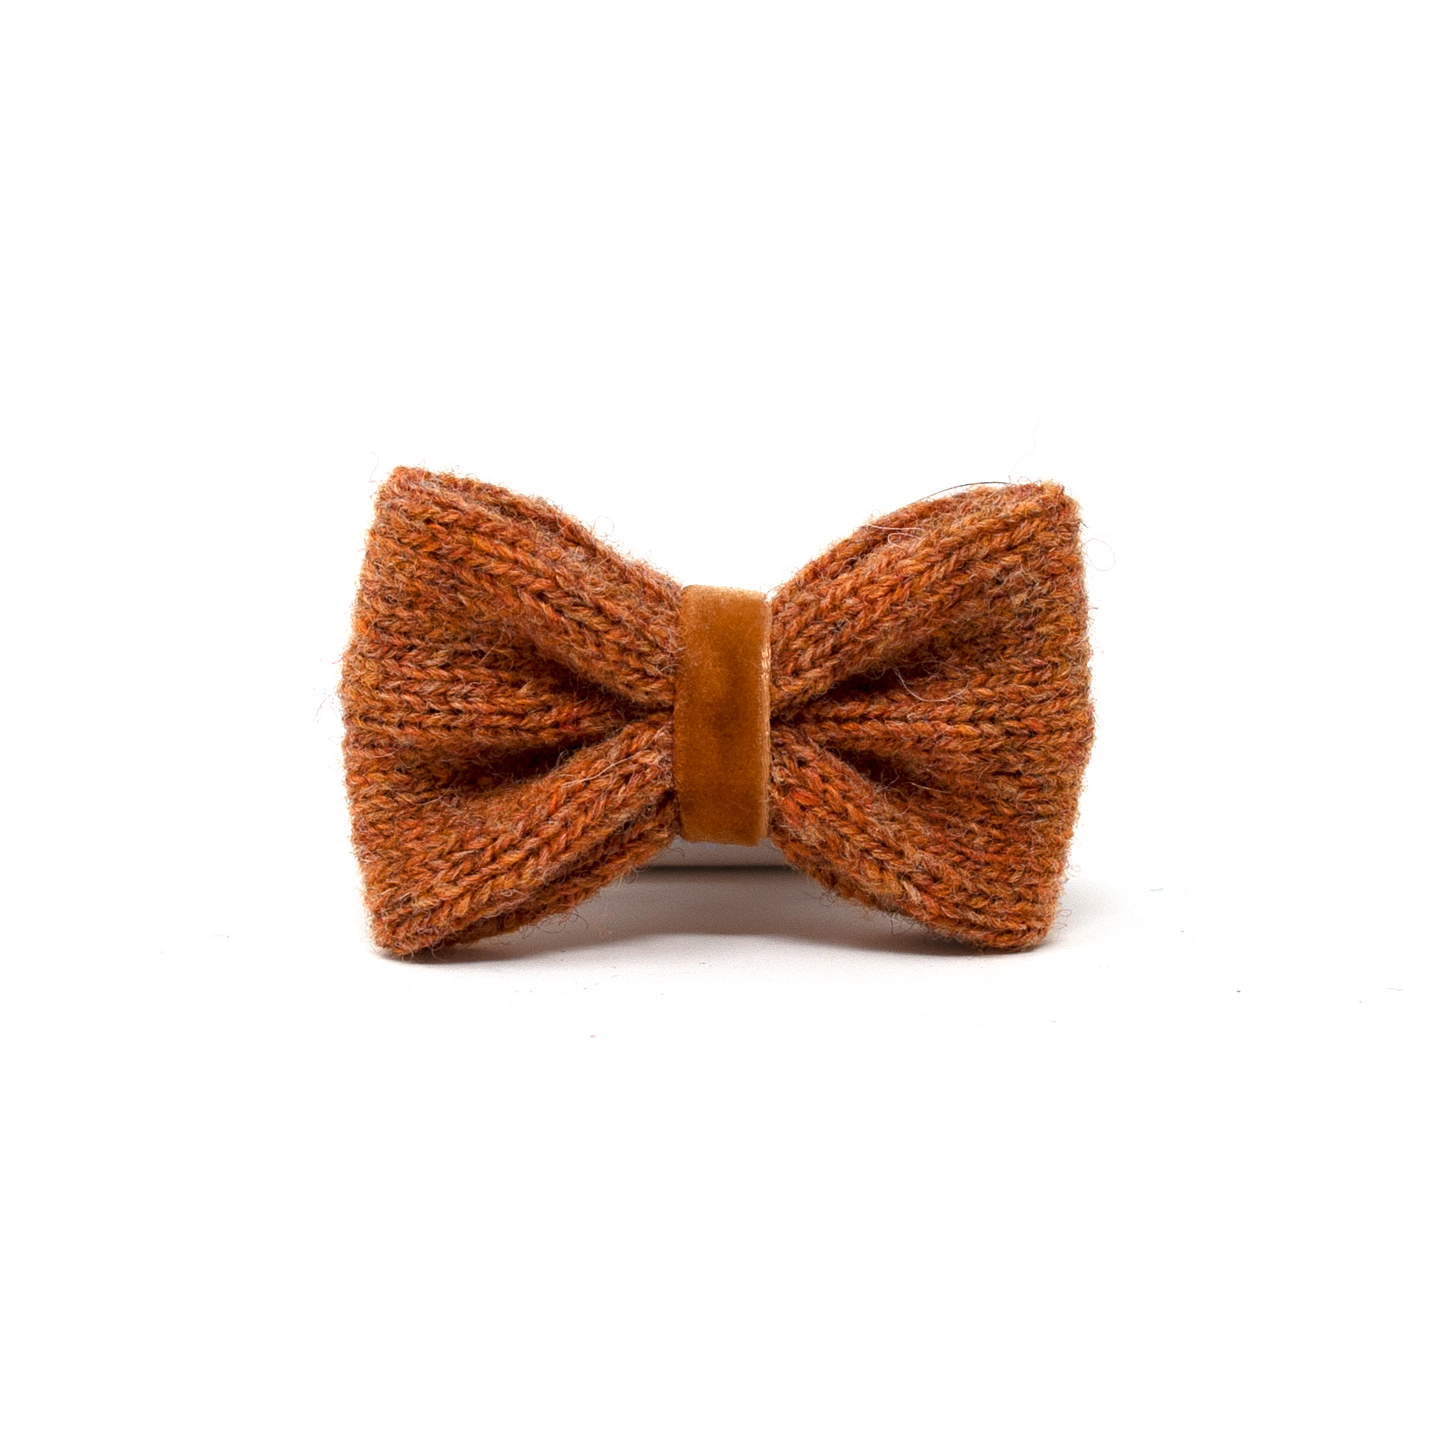 Copper - Autumn/Winter '23 Collection - Dog Bow Tie